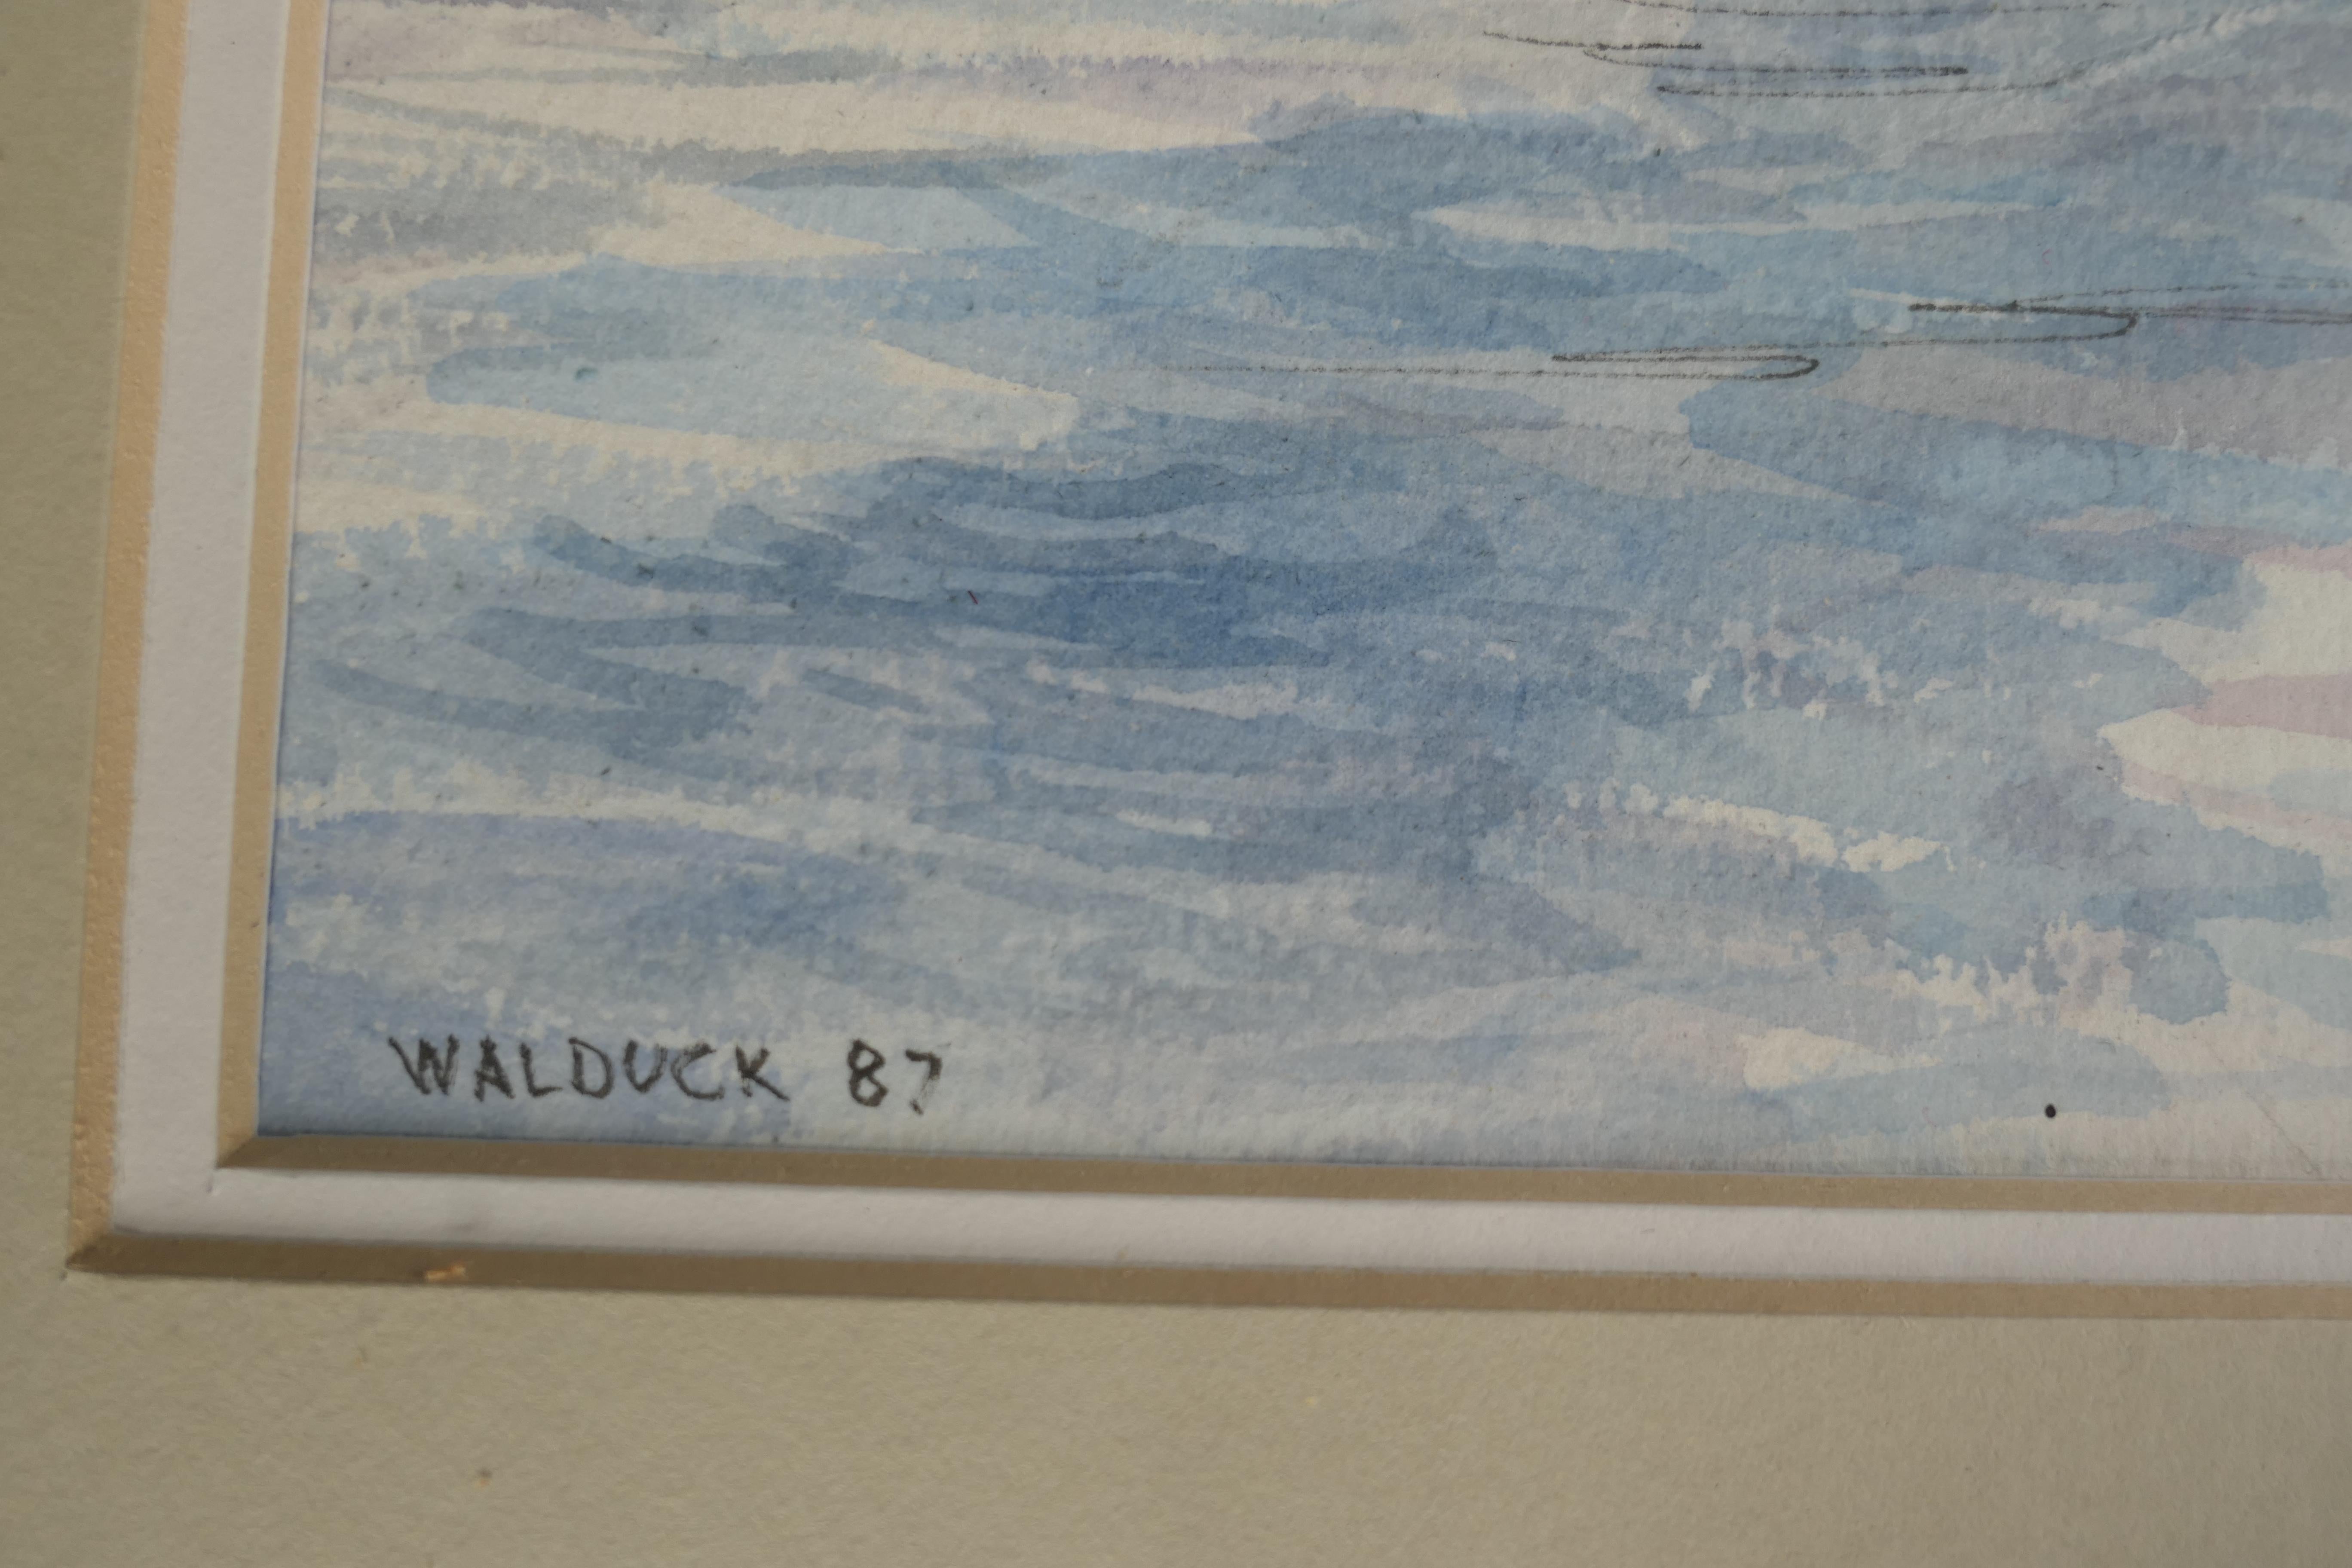 Framed and Glazed Ink and Watercolour by Desmond Walduck    In Good Condition For Sale In Chillerton, Isle of Wight